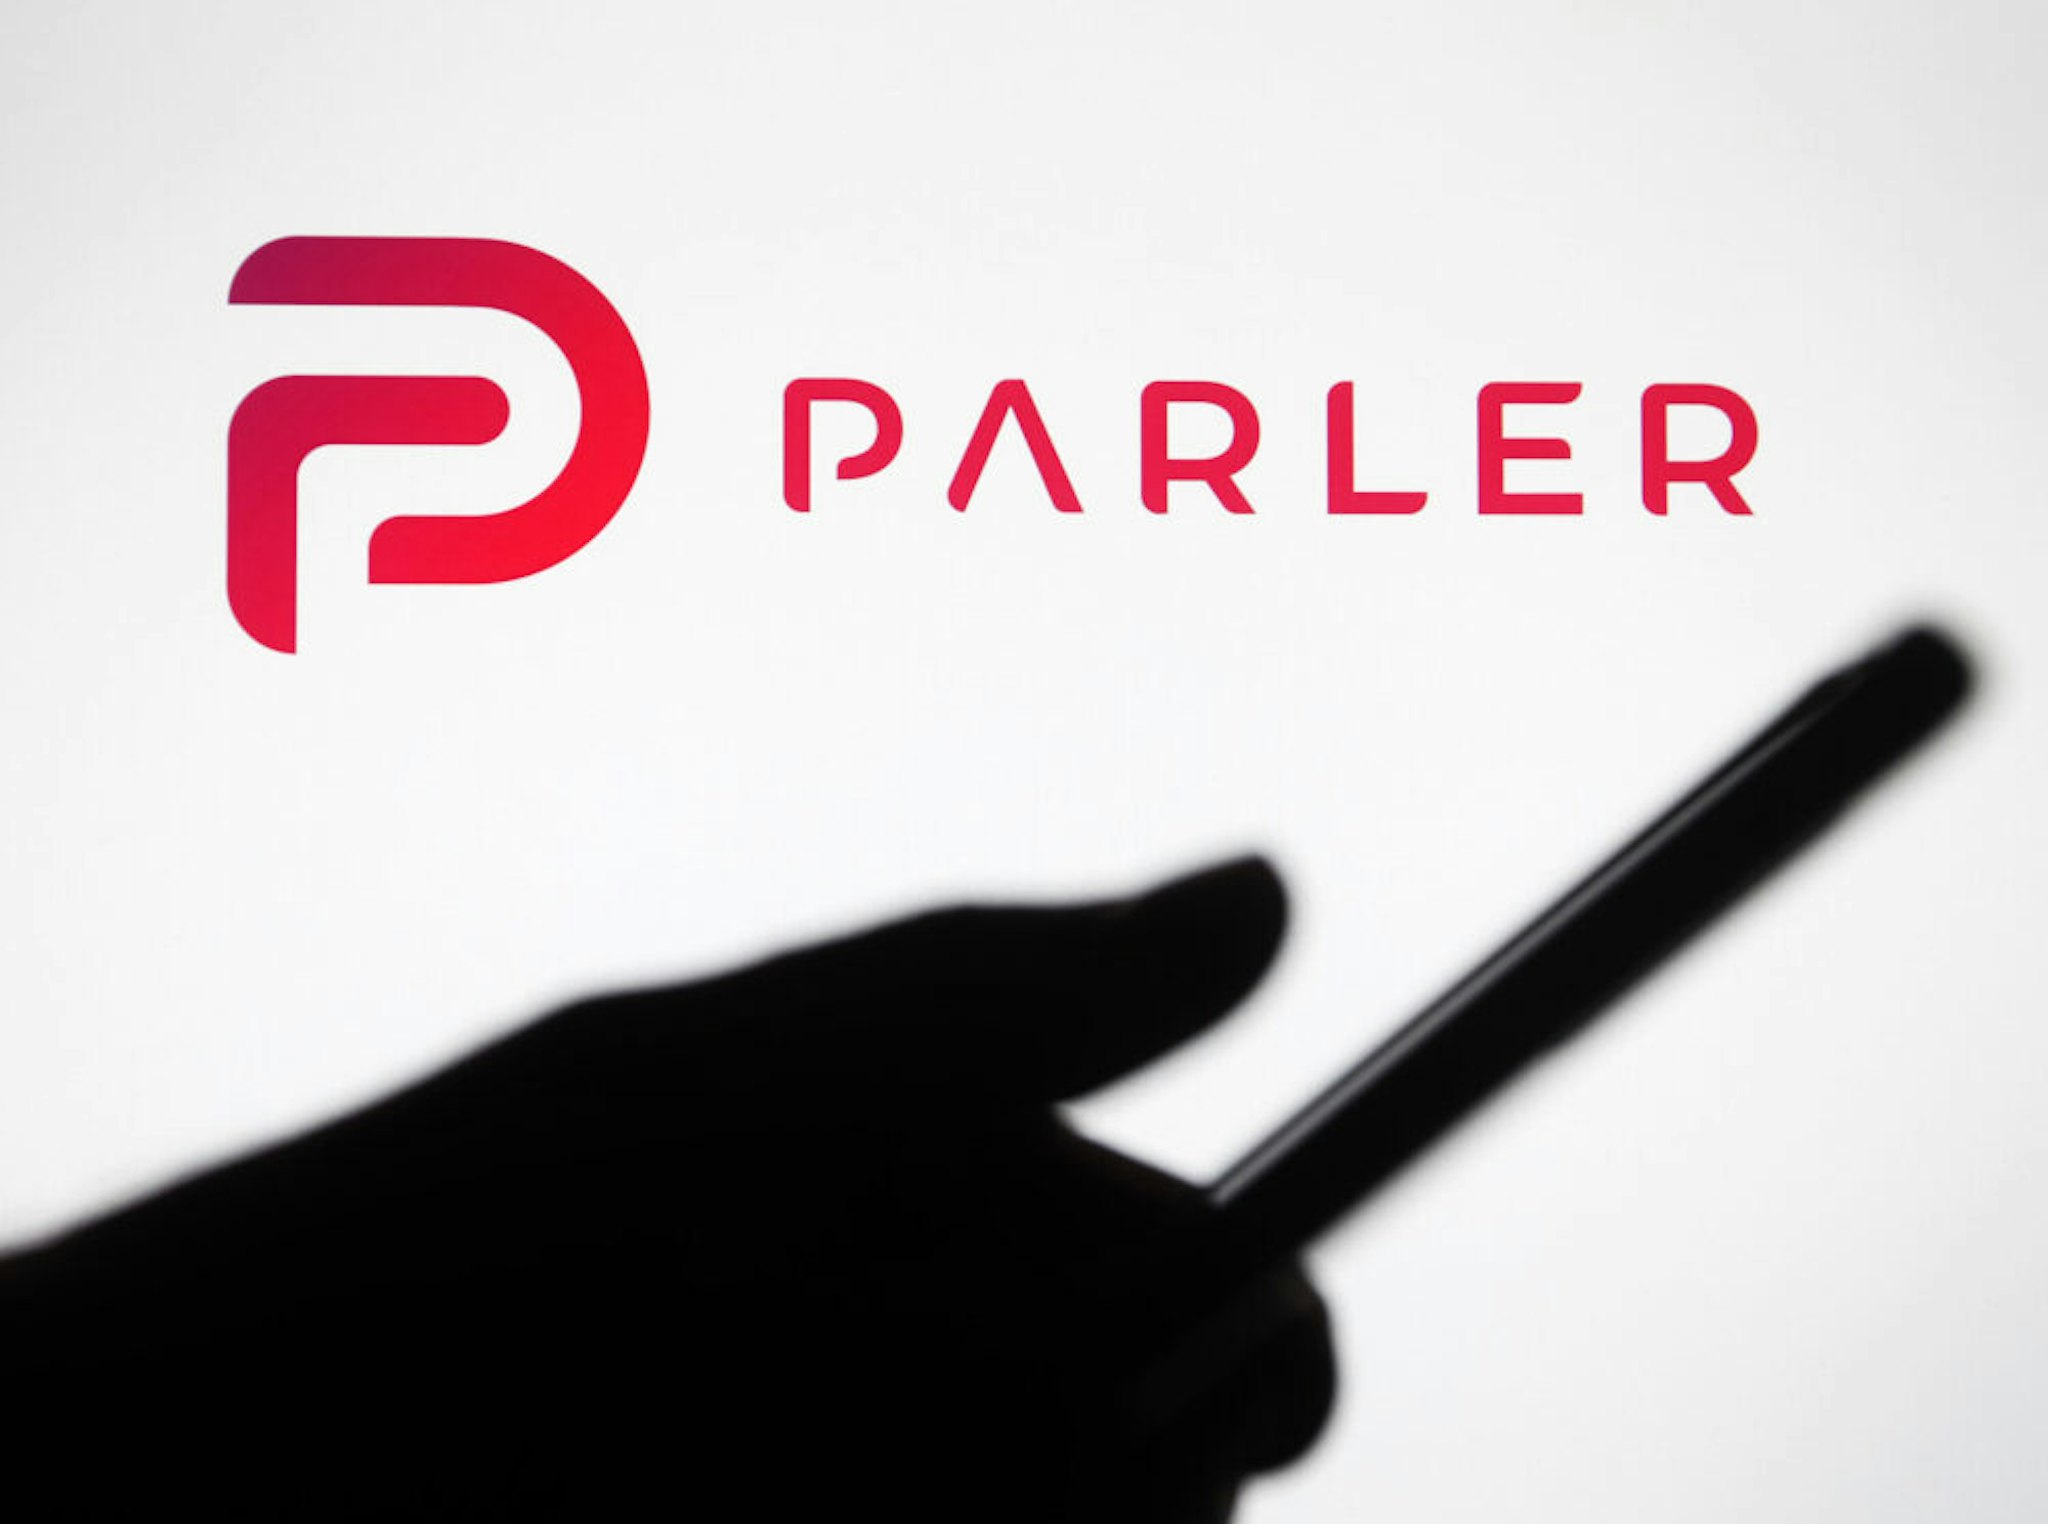 UKRAINE - 2021/01/10: In this photo illustration the Parler logo seen in front of a silhouette hand holding a smartphone. Google, Apple and Amazon have suspended the social networking app Parler. Parler became unavailable in App Store, Google Play and Amazon Web Services, reportedly as said insufficient control over user posts that encouraged violence, reportedly by media.